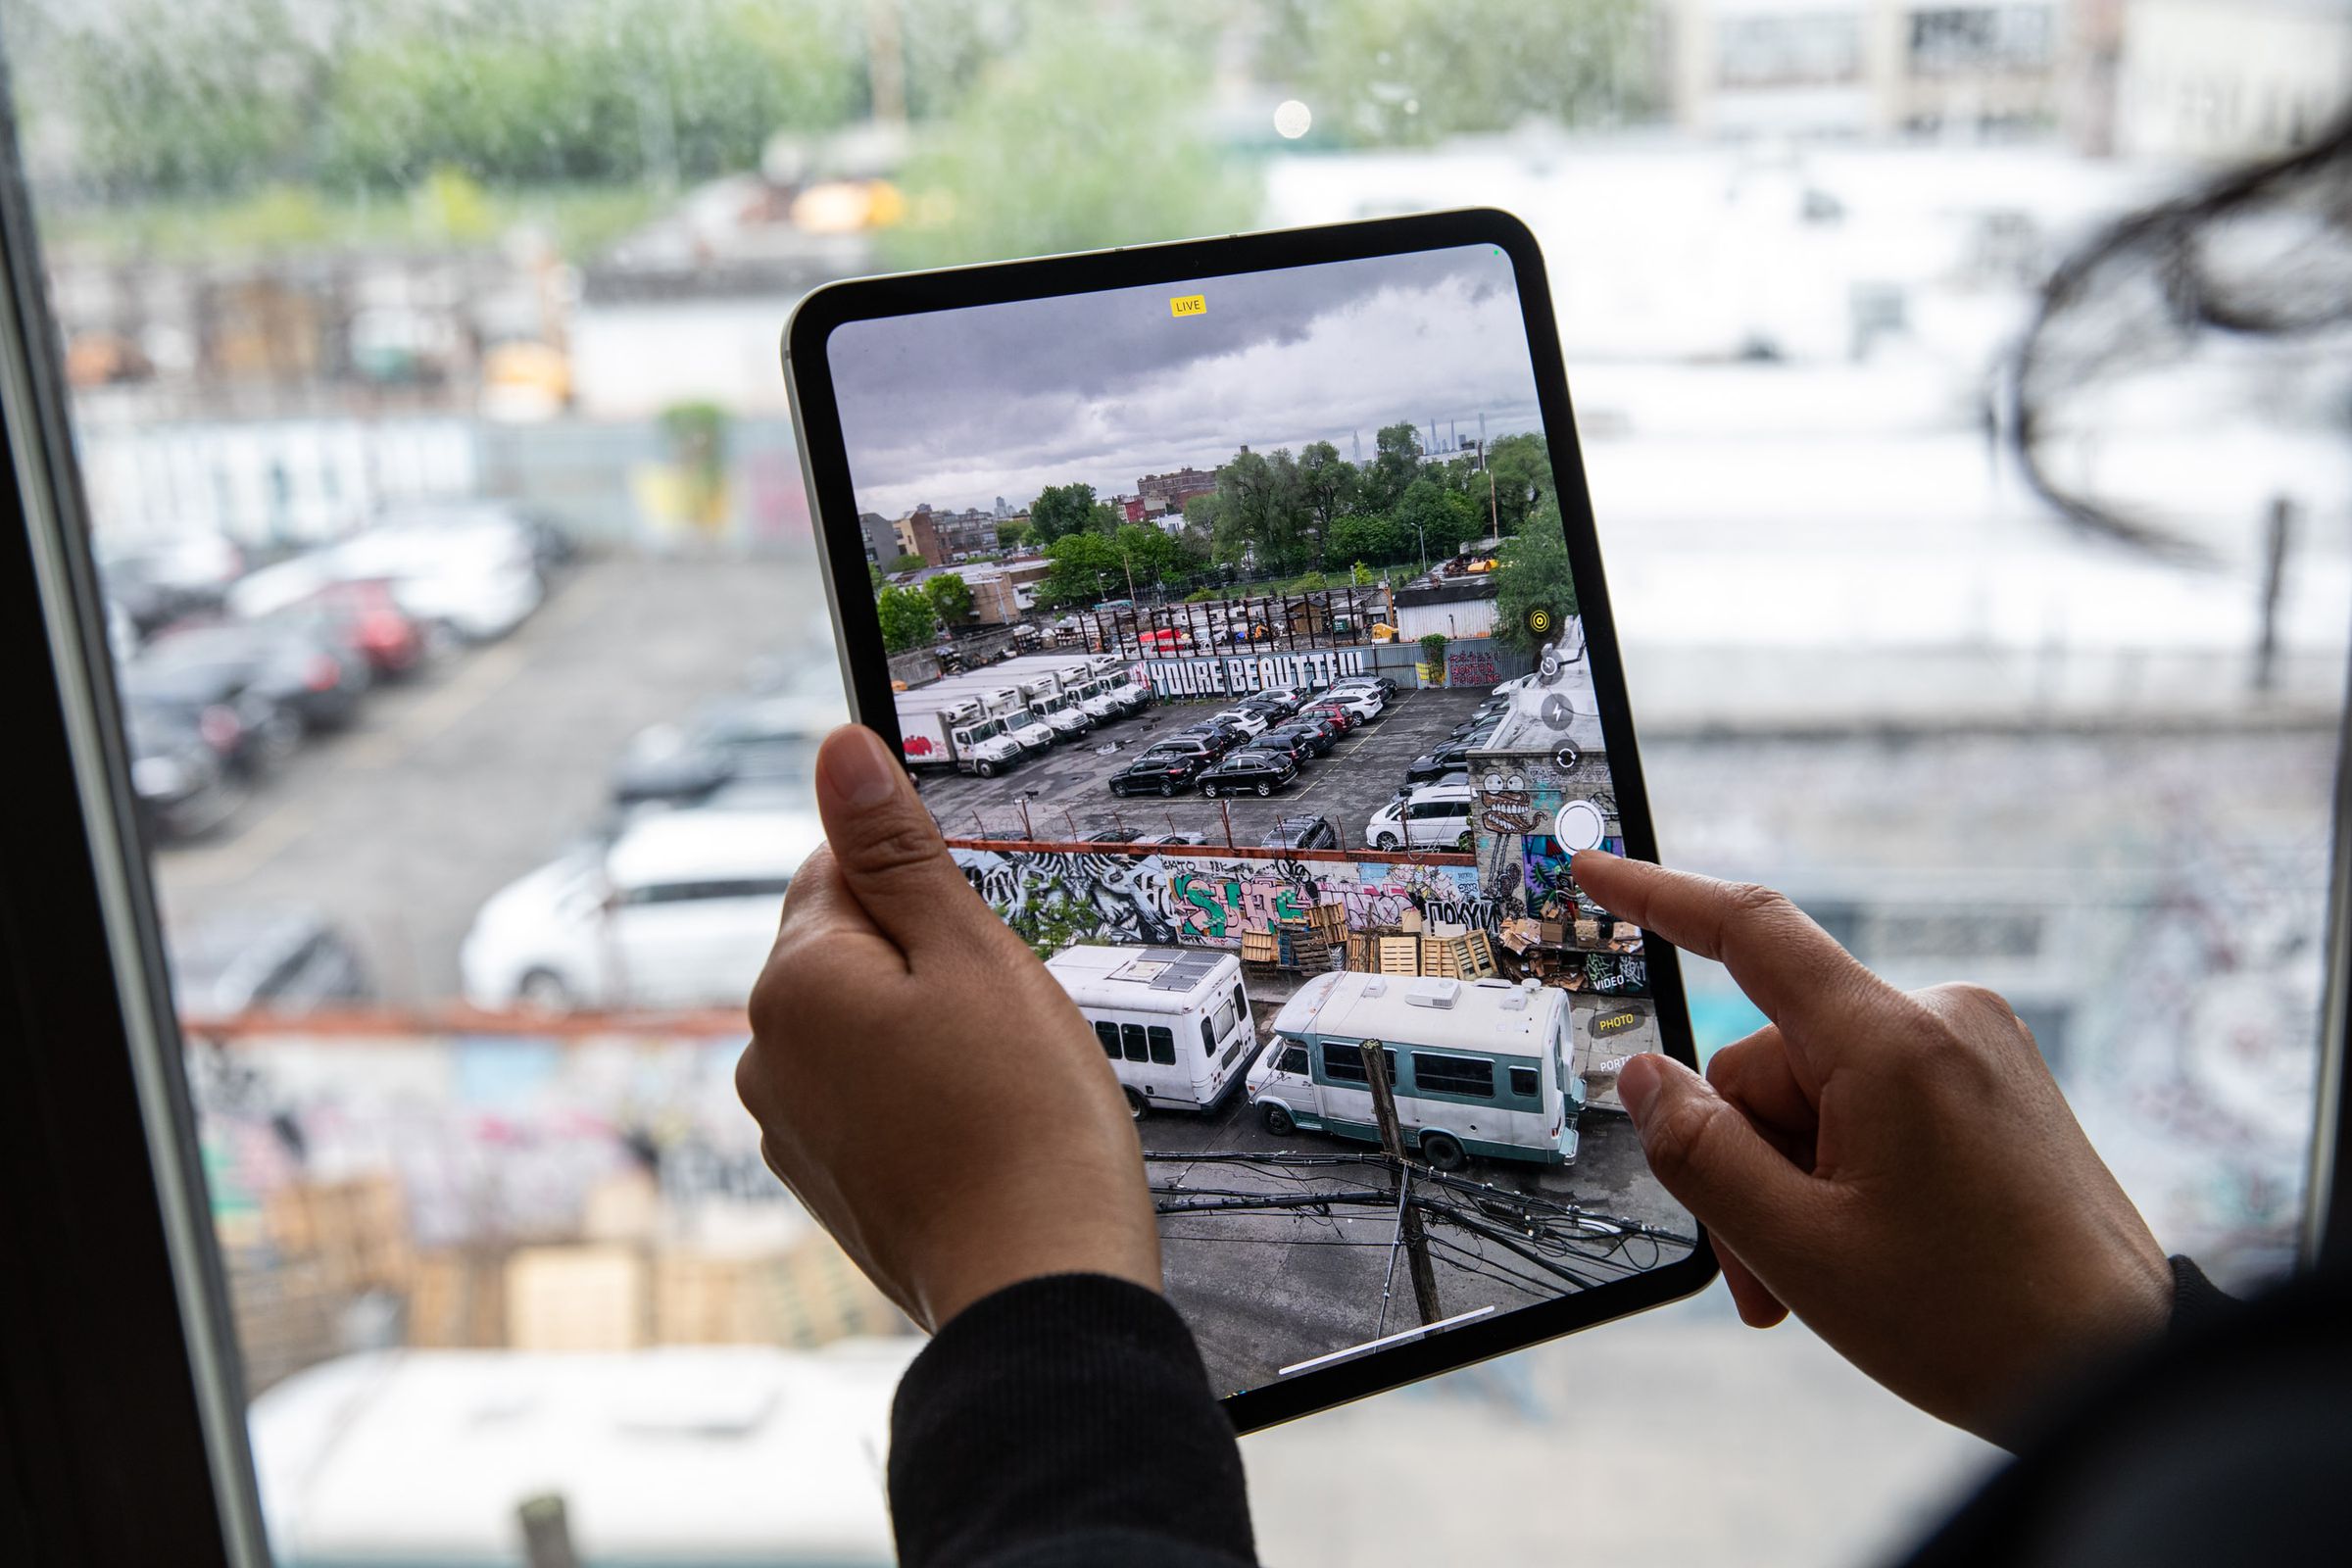 A photo of the iPad Pro, showing a live view of a parking lot.